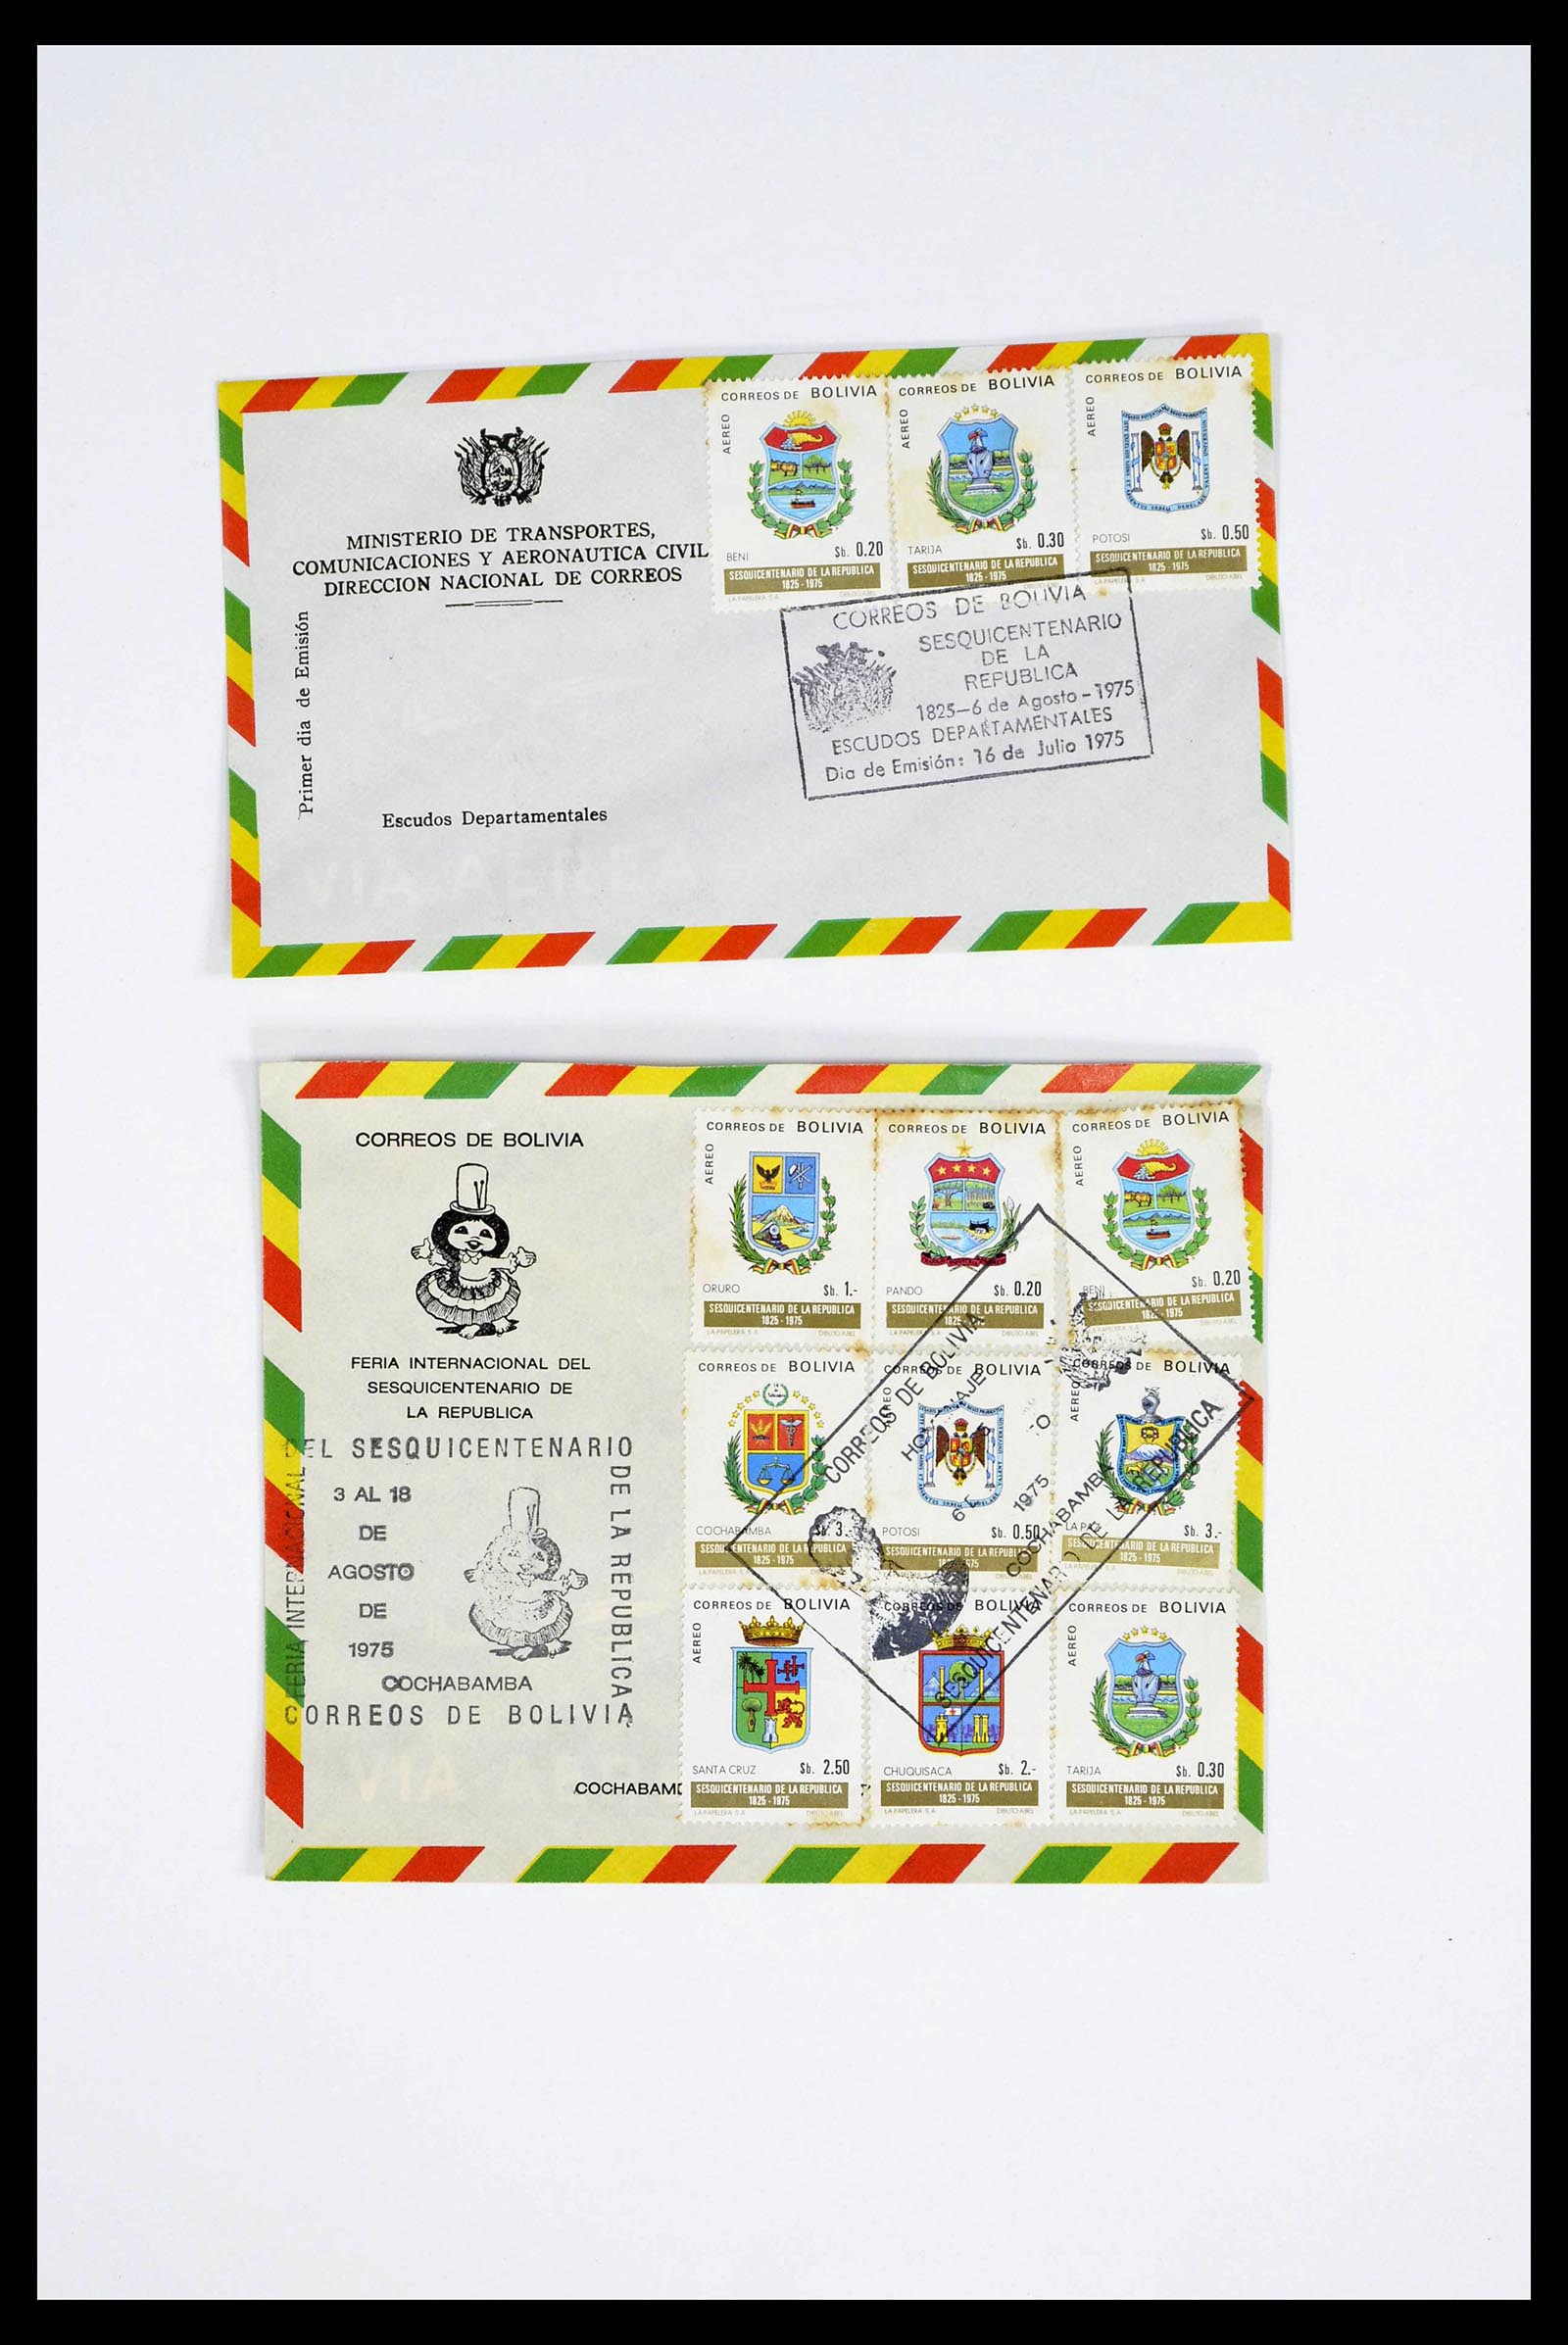 39271 0026 - Stamp collection 39271 Bolivia covers 1950-1980.